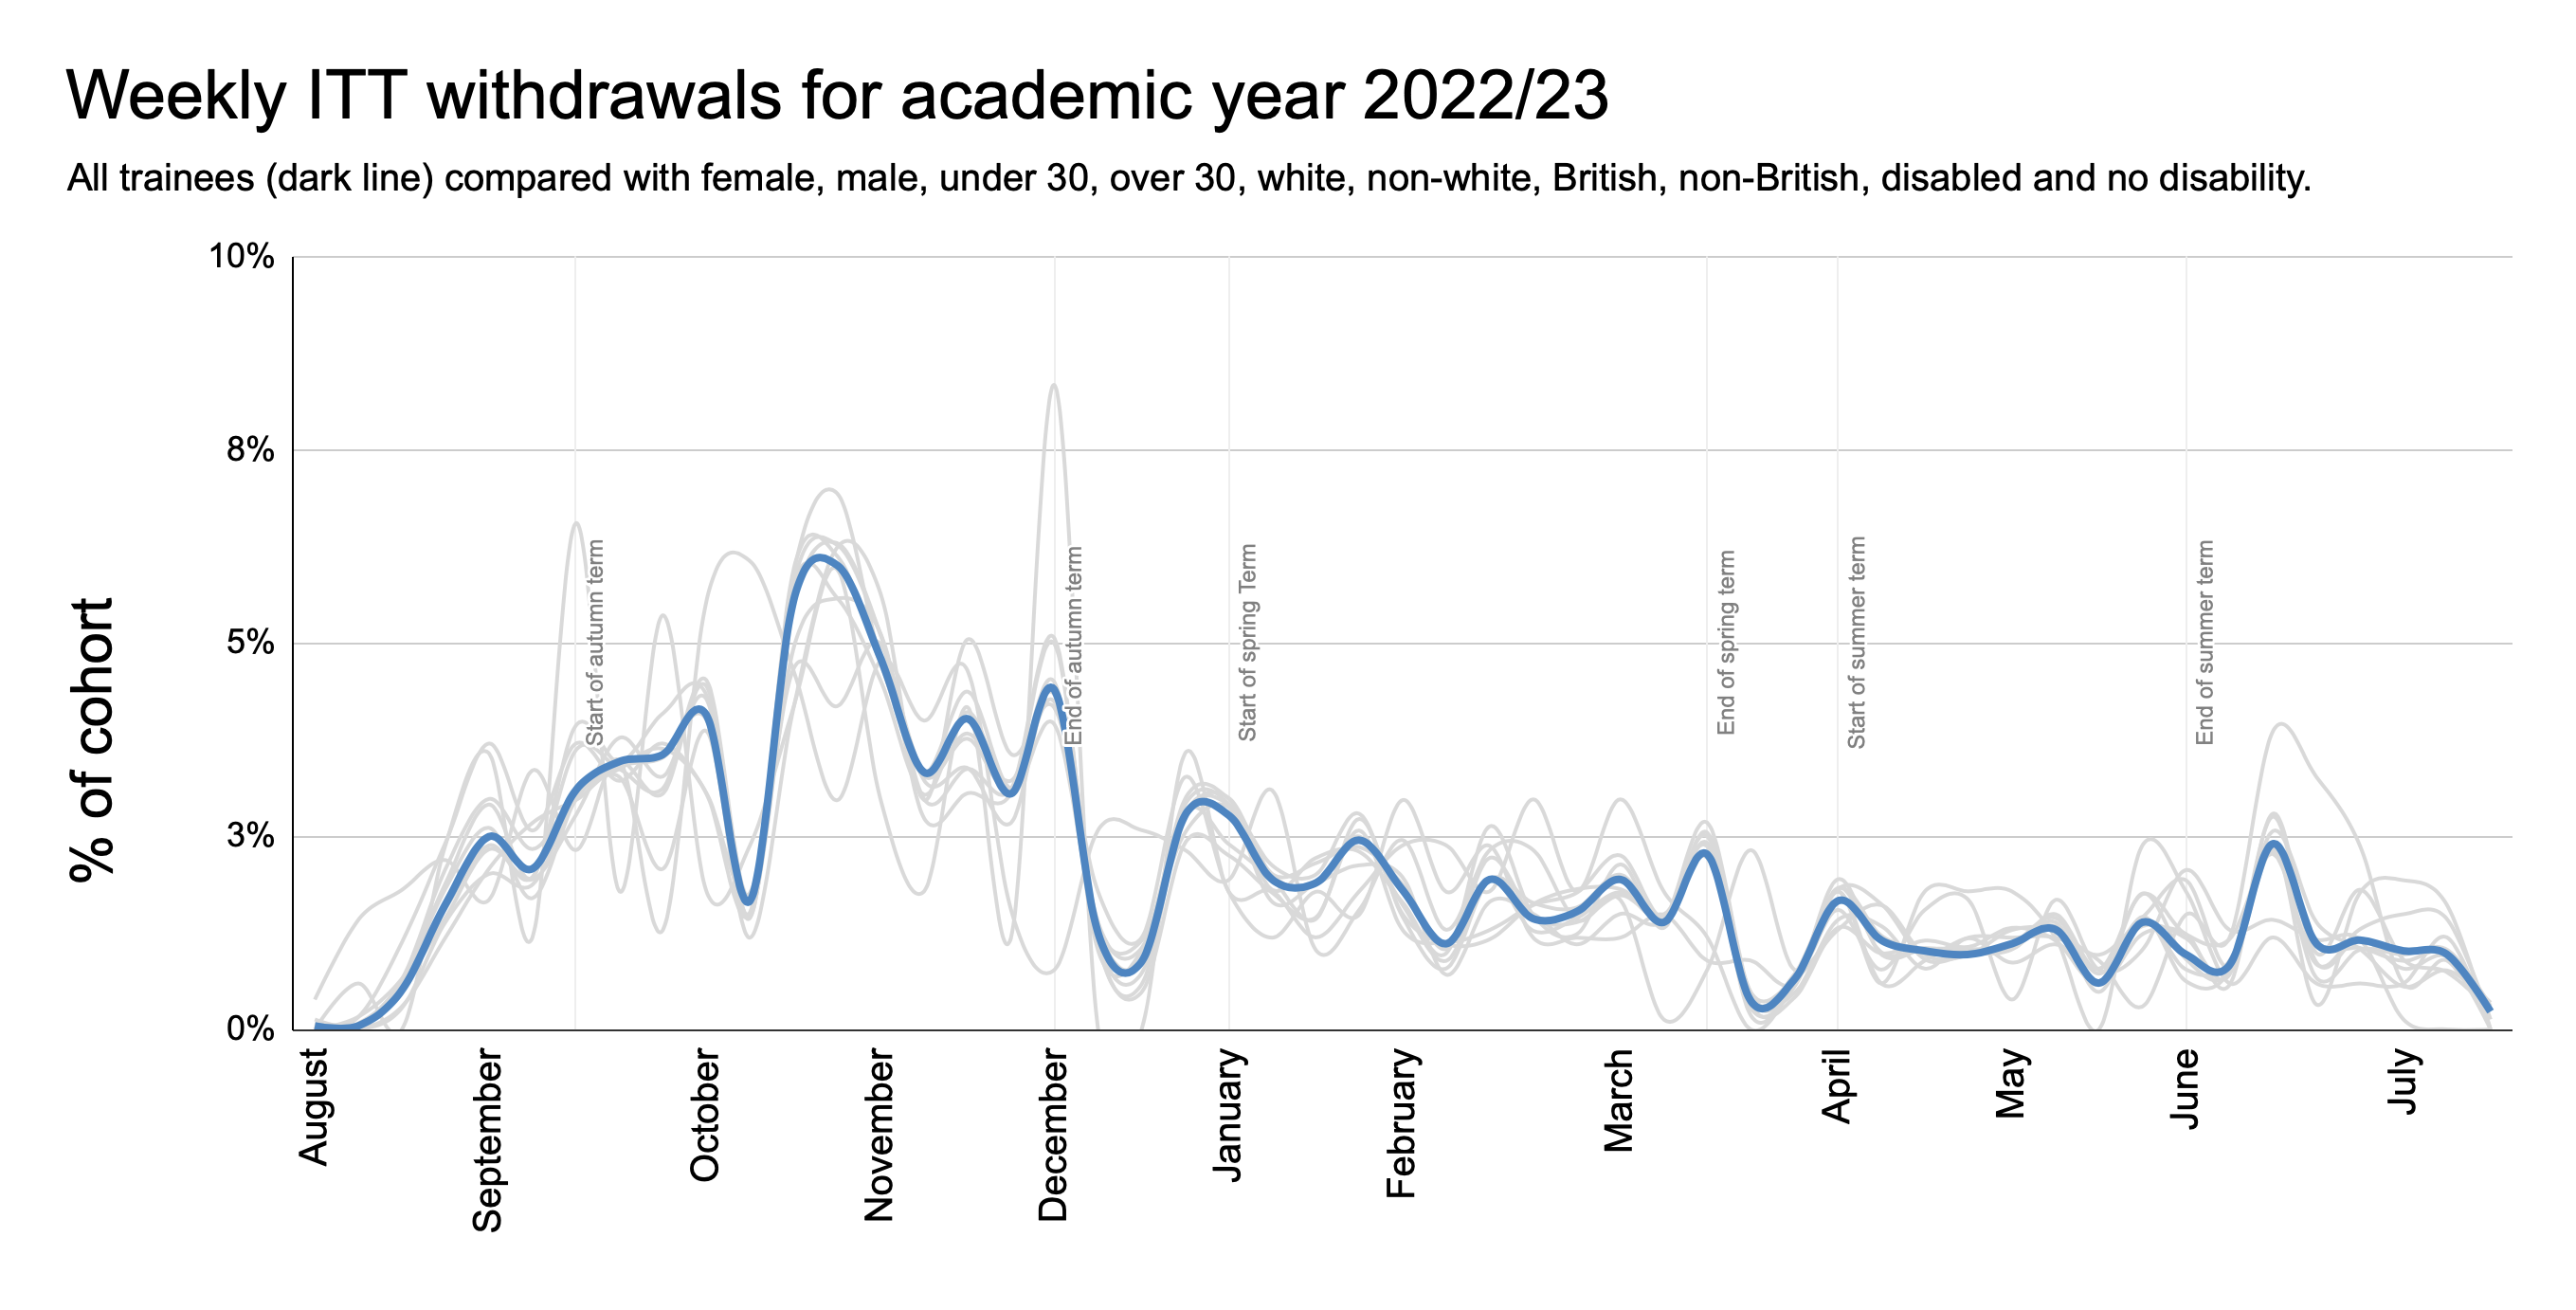 A line graph showing weekly ITT withdrawals for the academic year 2022 to 2023. It shows a clear rise in withdrawals in the first three months for all cohorts gradually reducing in number until the end of the academic year